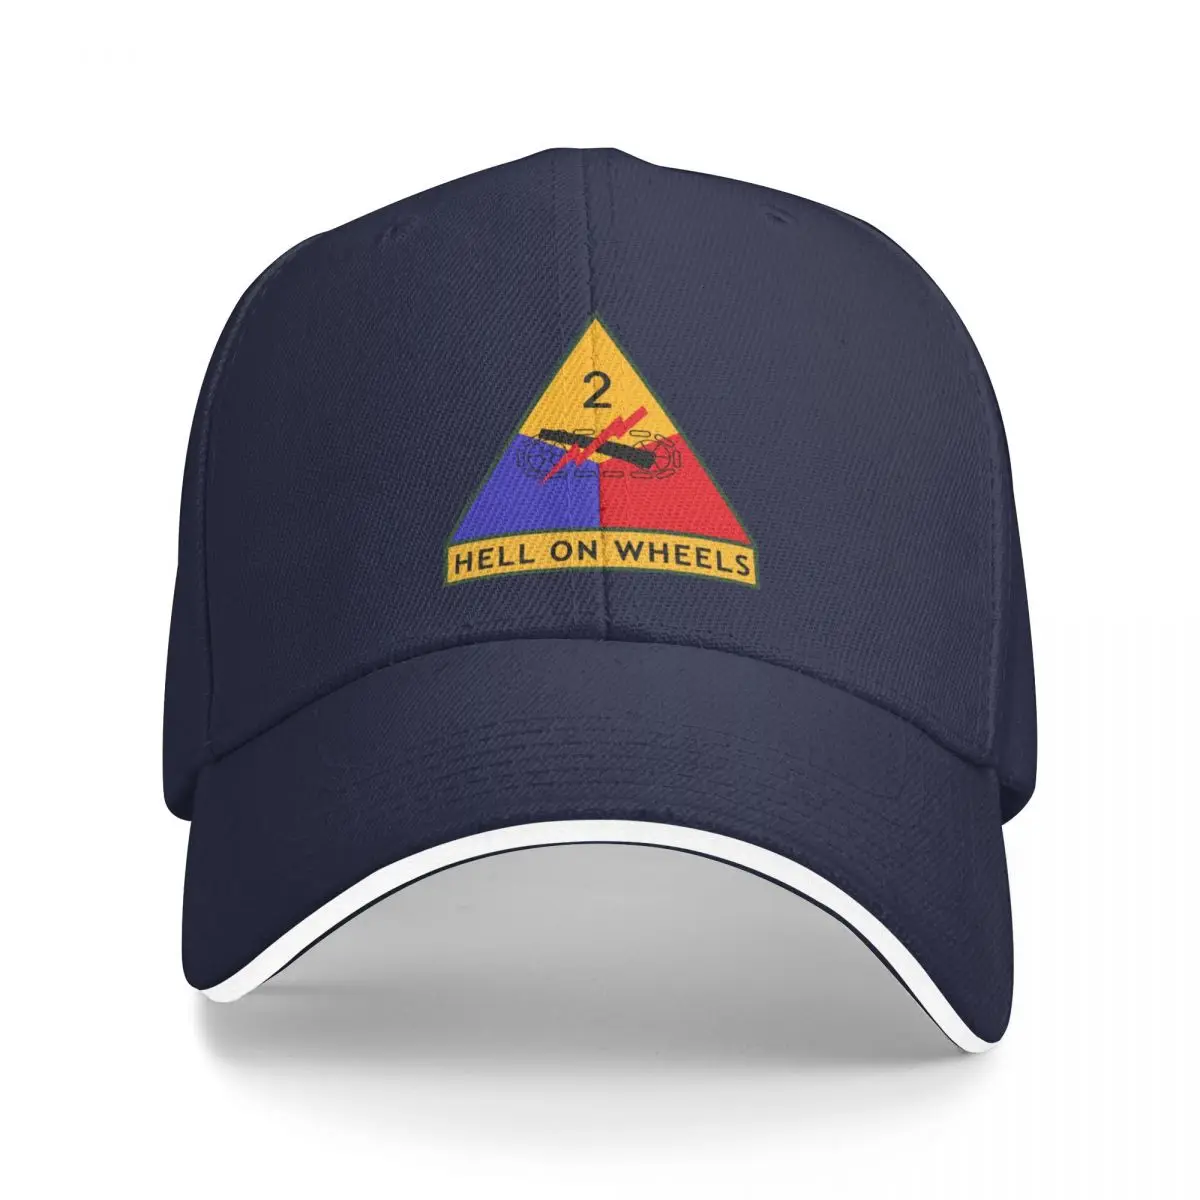 

New 2nd Armored Division Hell on Wheels quot (United States Army) Baseball Cap Golf Hat Snap Back Hat Anime Hat Men Hats Women 1